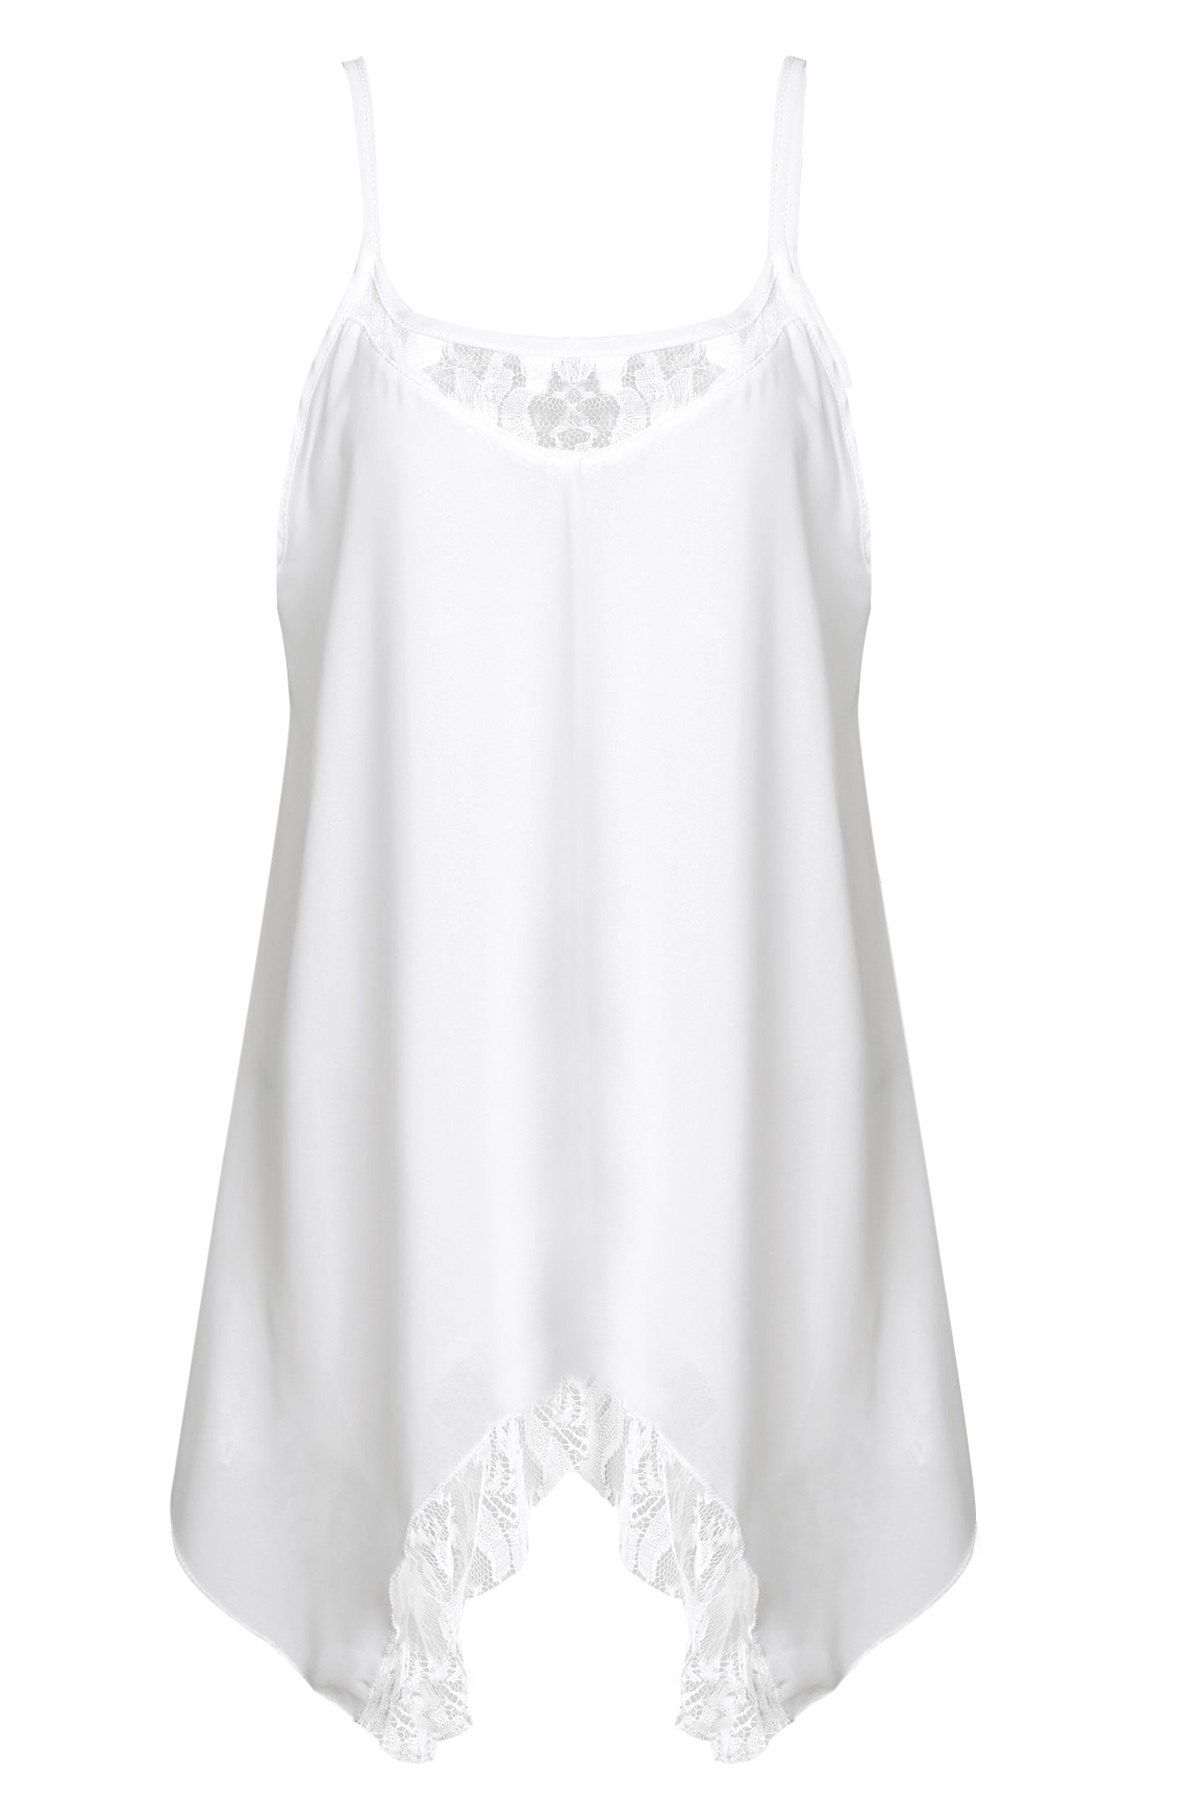 fashionable-asymmetrical-lace-splicing-tank-dress-for-women-white-s-in-casual-dresses